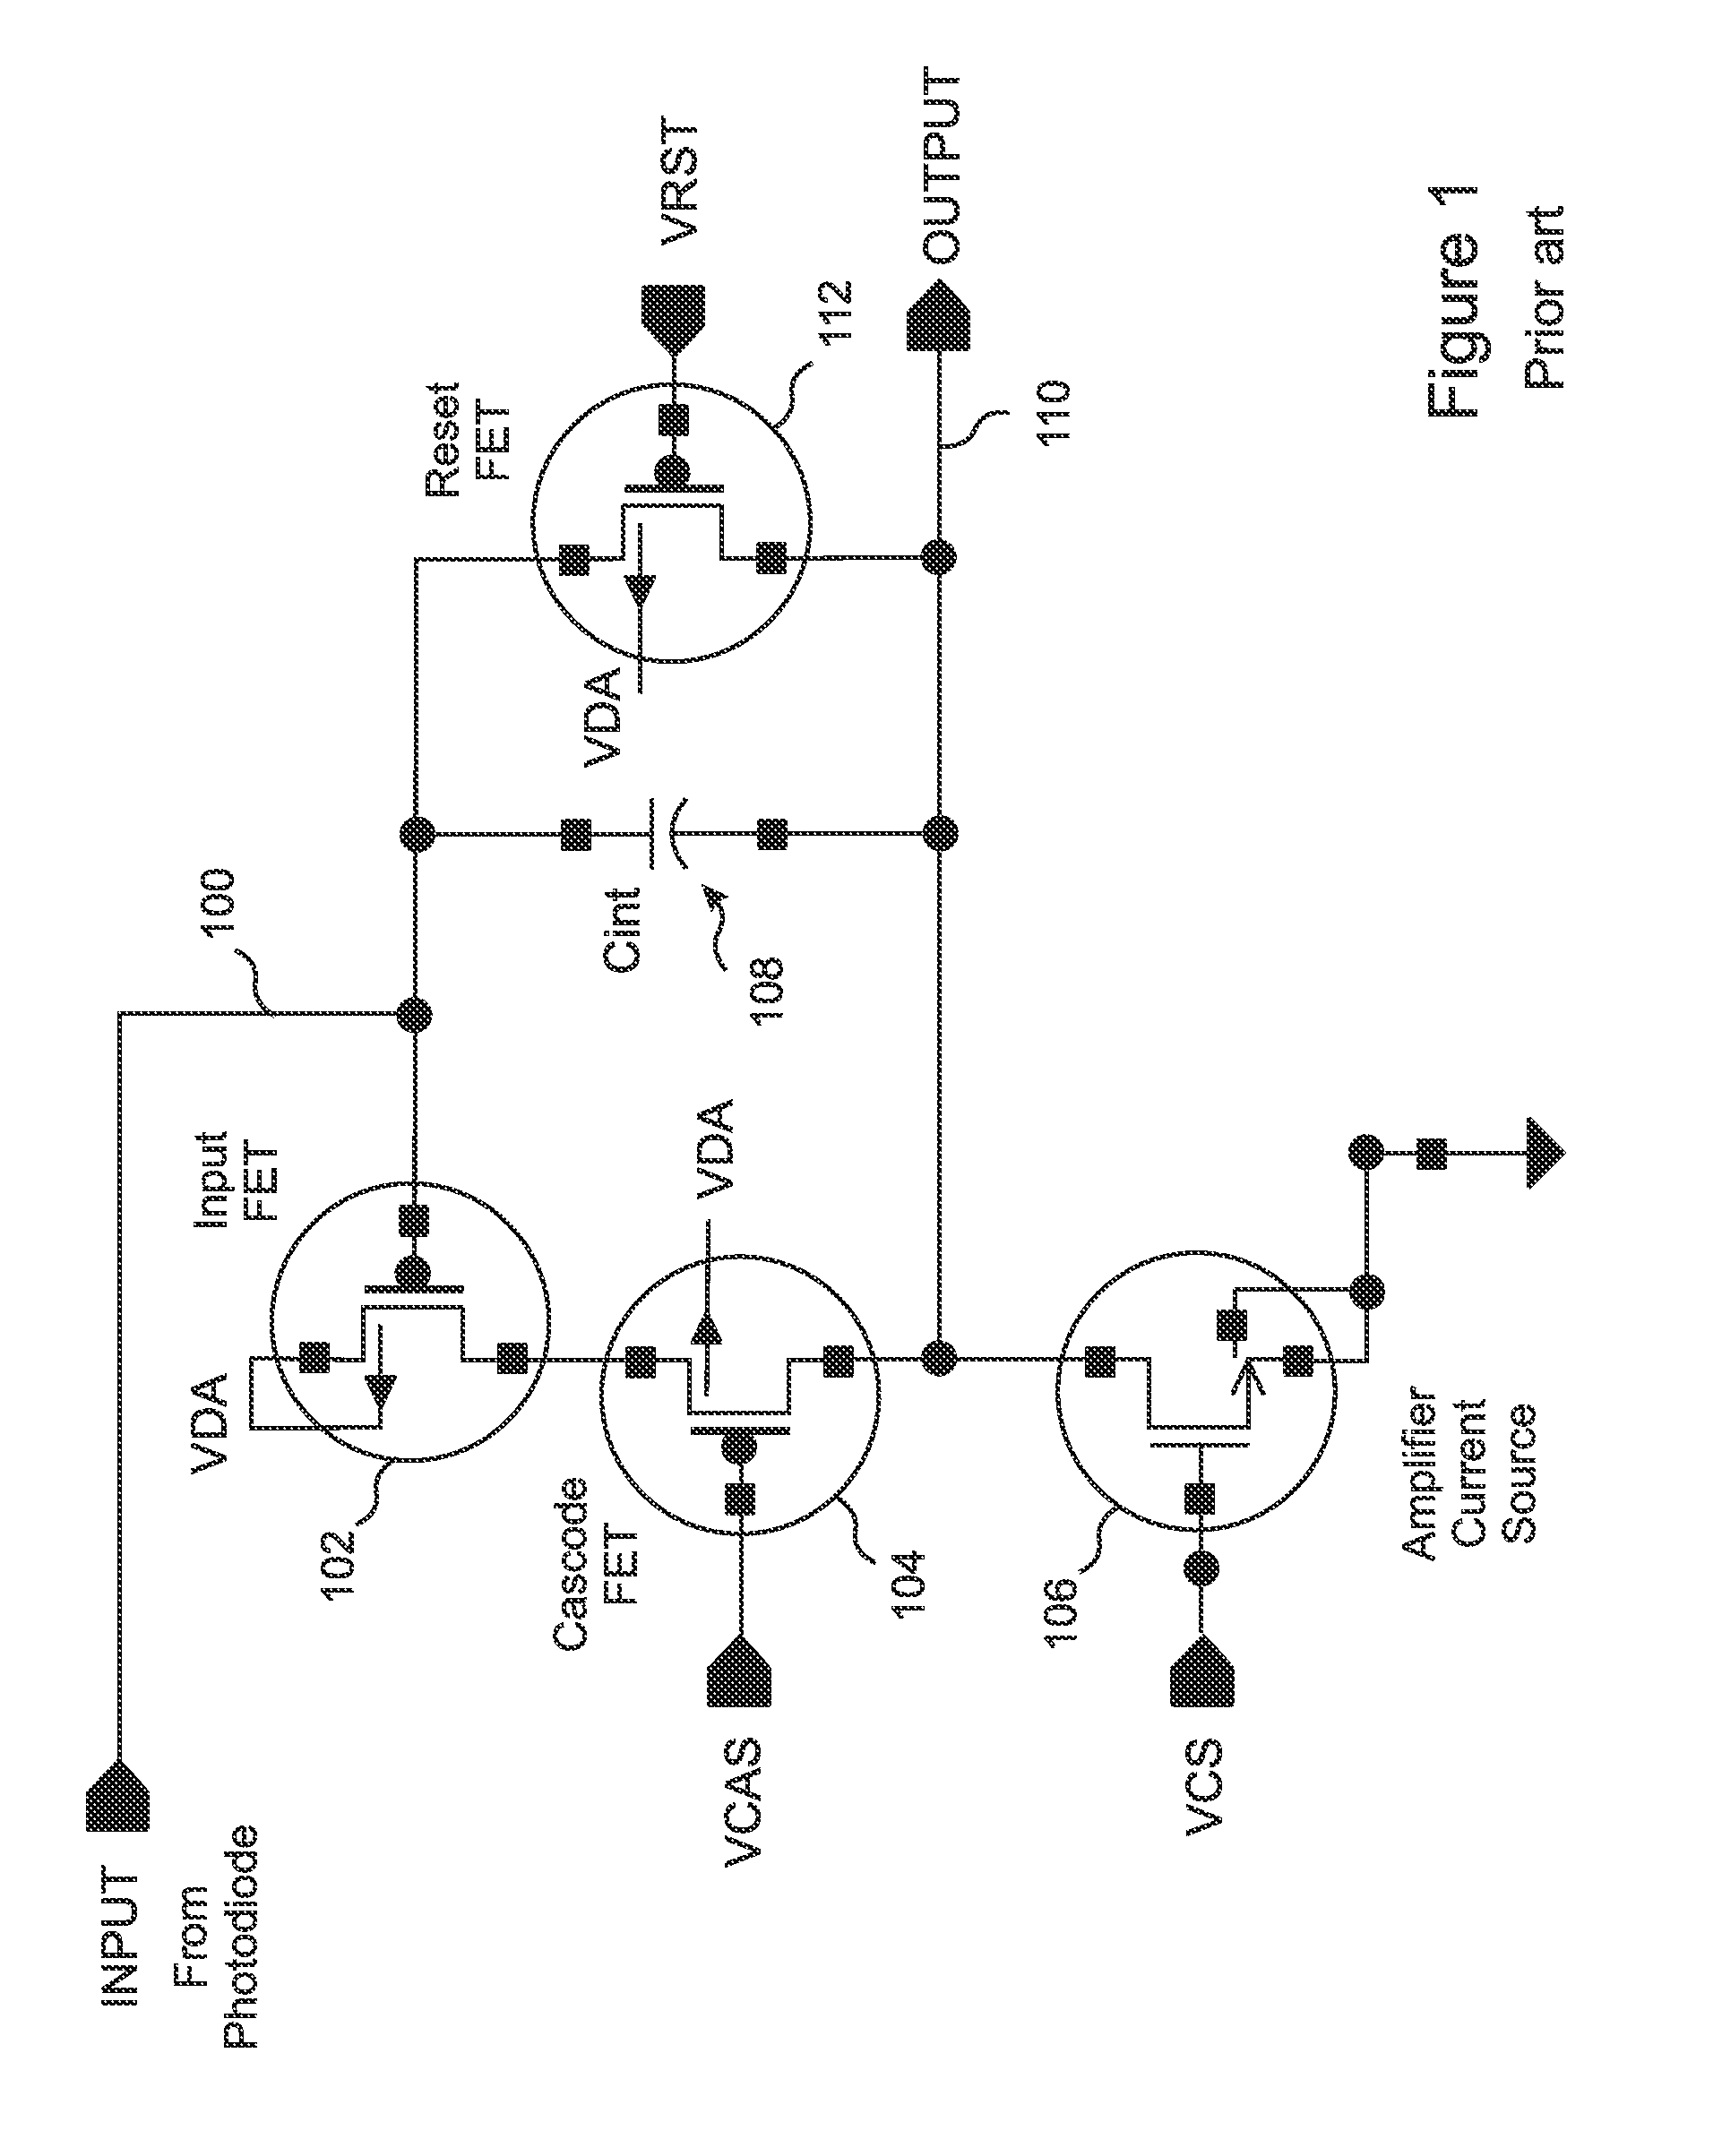 Anti-blooming circuit for integrating photodiode pre-amplifiers